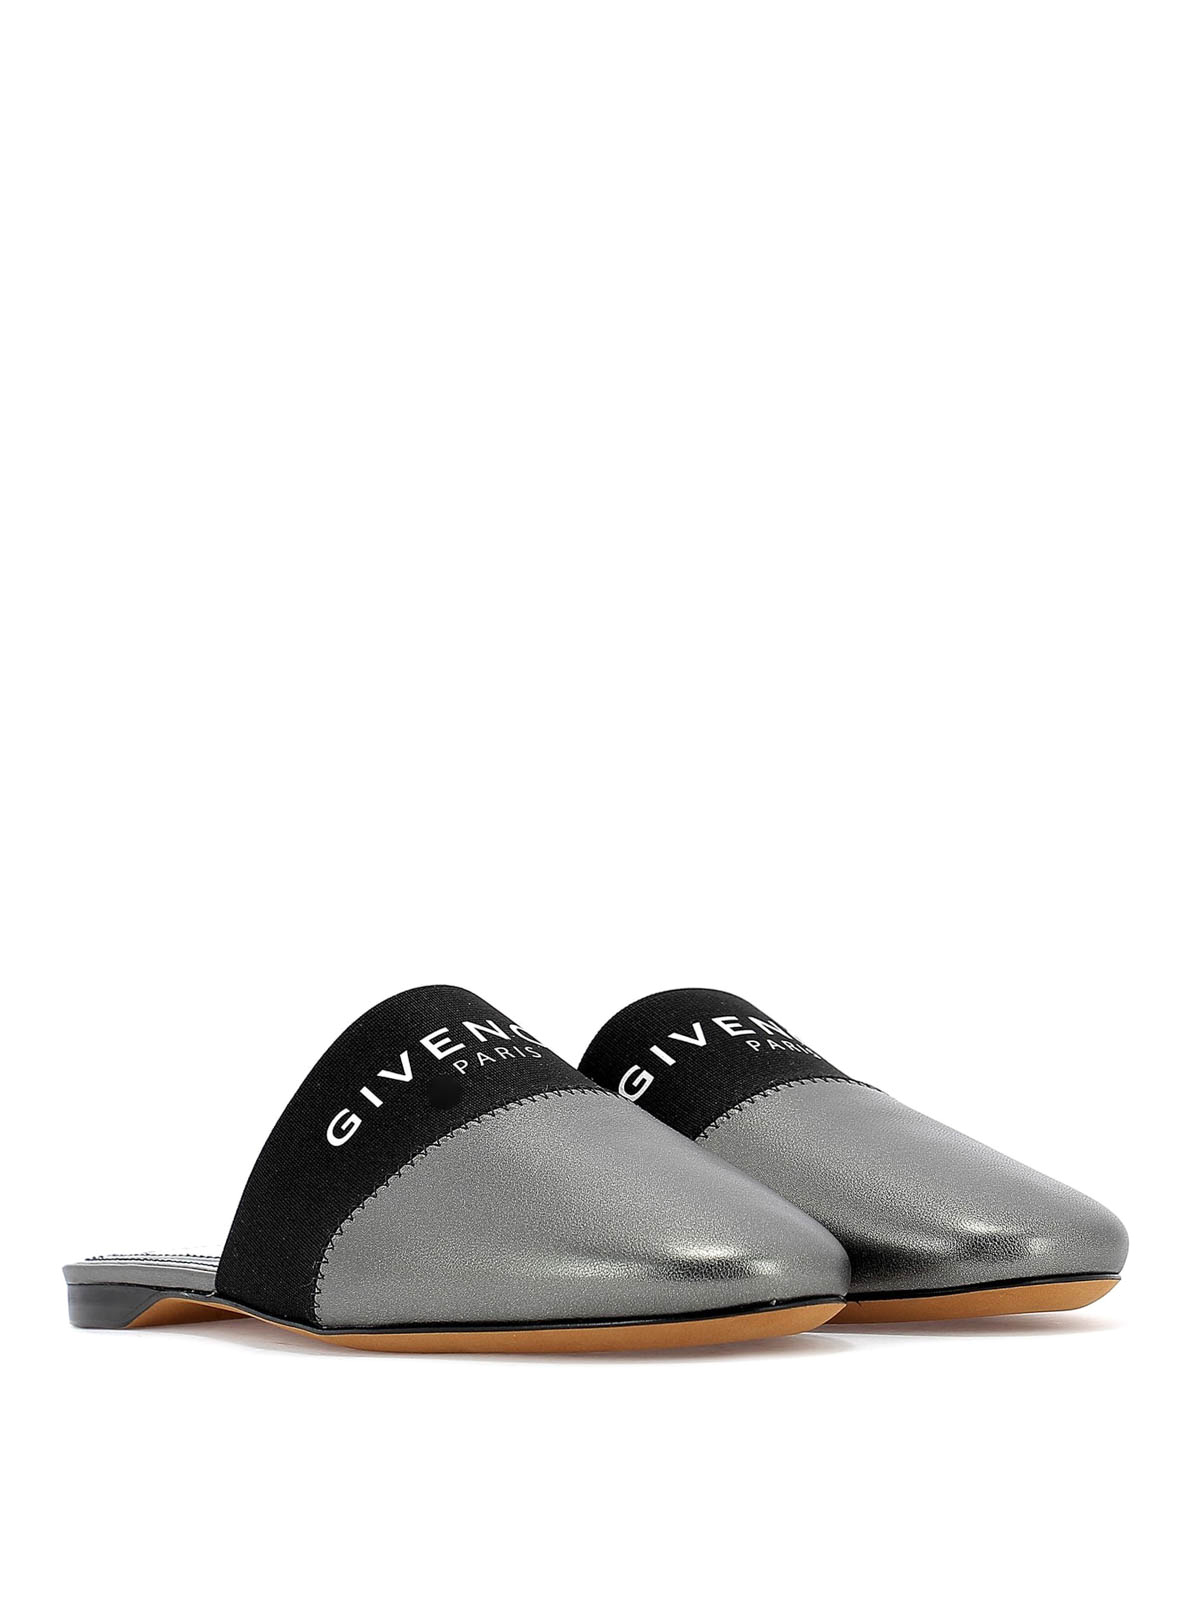 givenchy flat mules